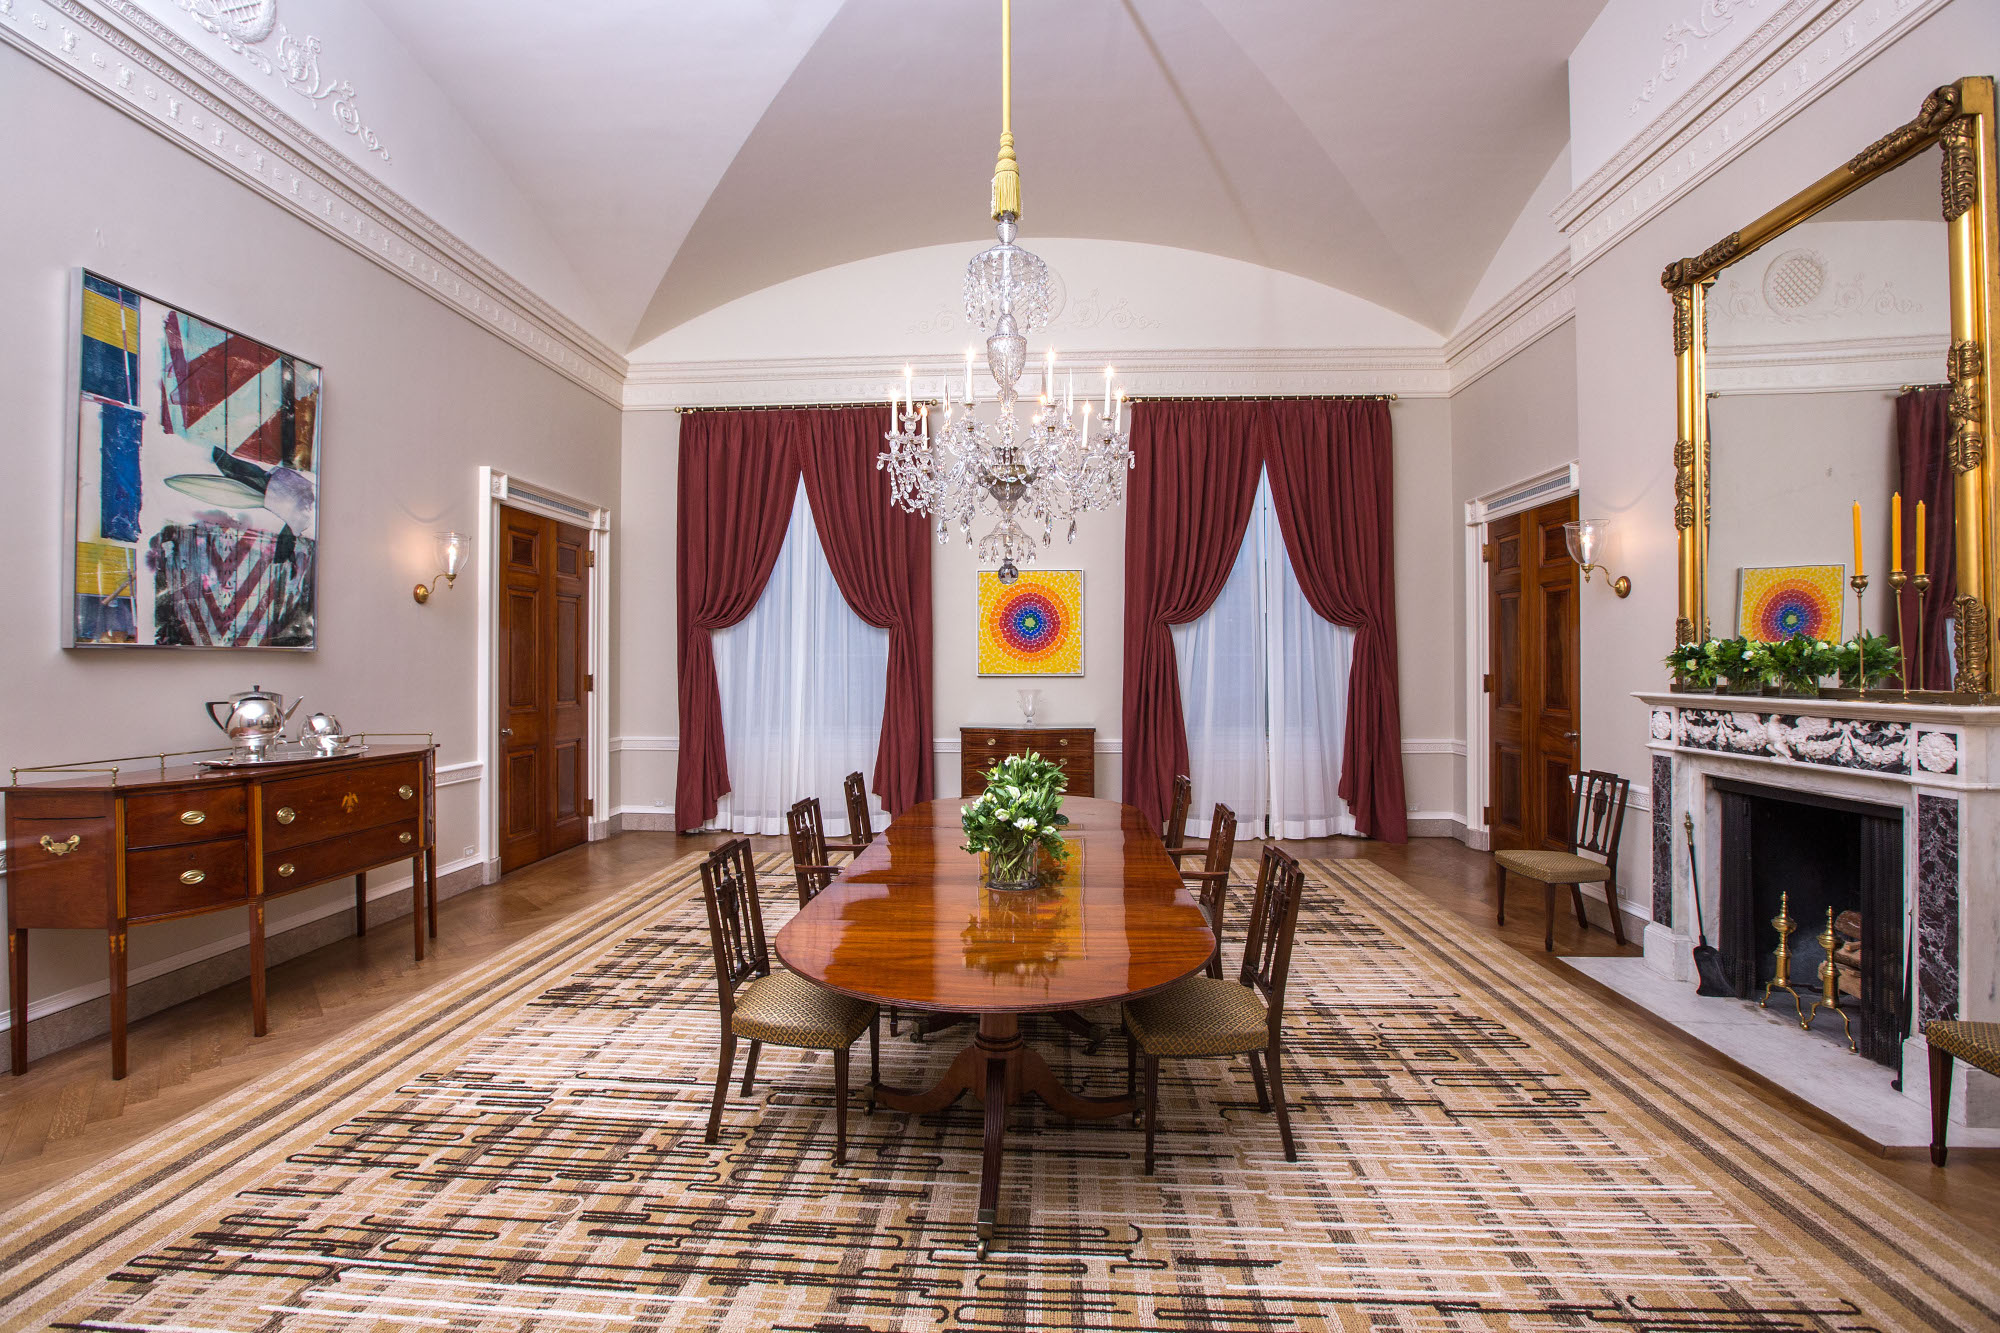 The Old Family Dining Room of the White House, Feb. 9, 2015. Official White House Photo by Amanda Lucidon. The rug in this image was inspired by Anni Albers' textiles. 